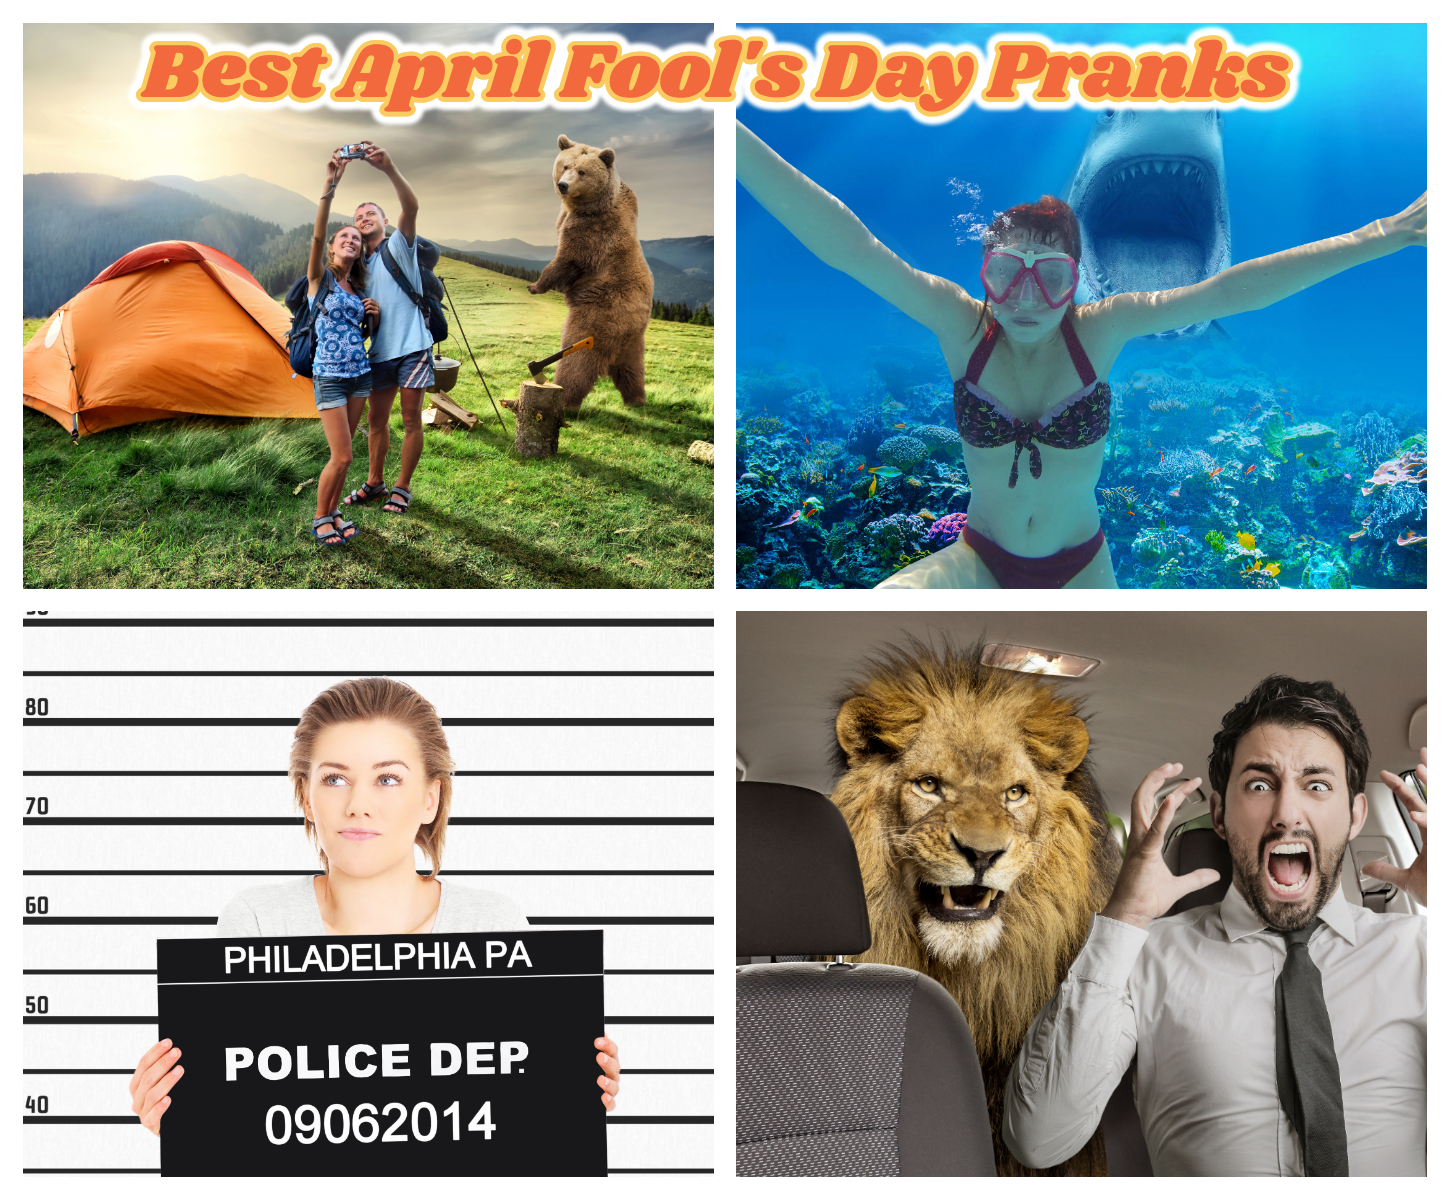 Best April Fool's Day Pranks images. Grid of four fun images.